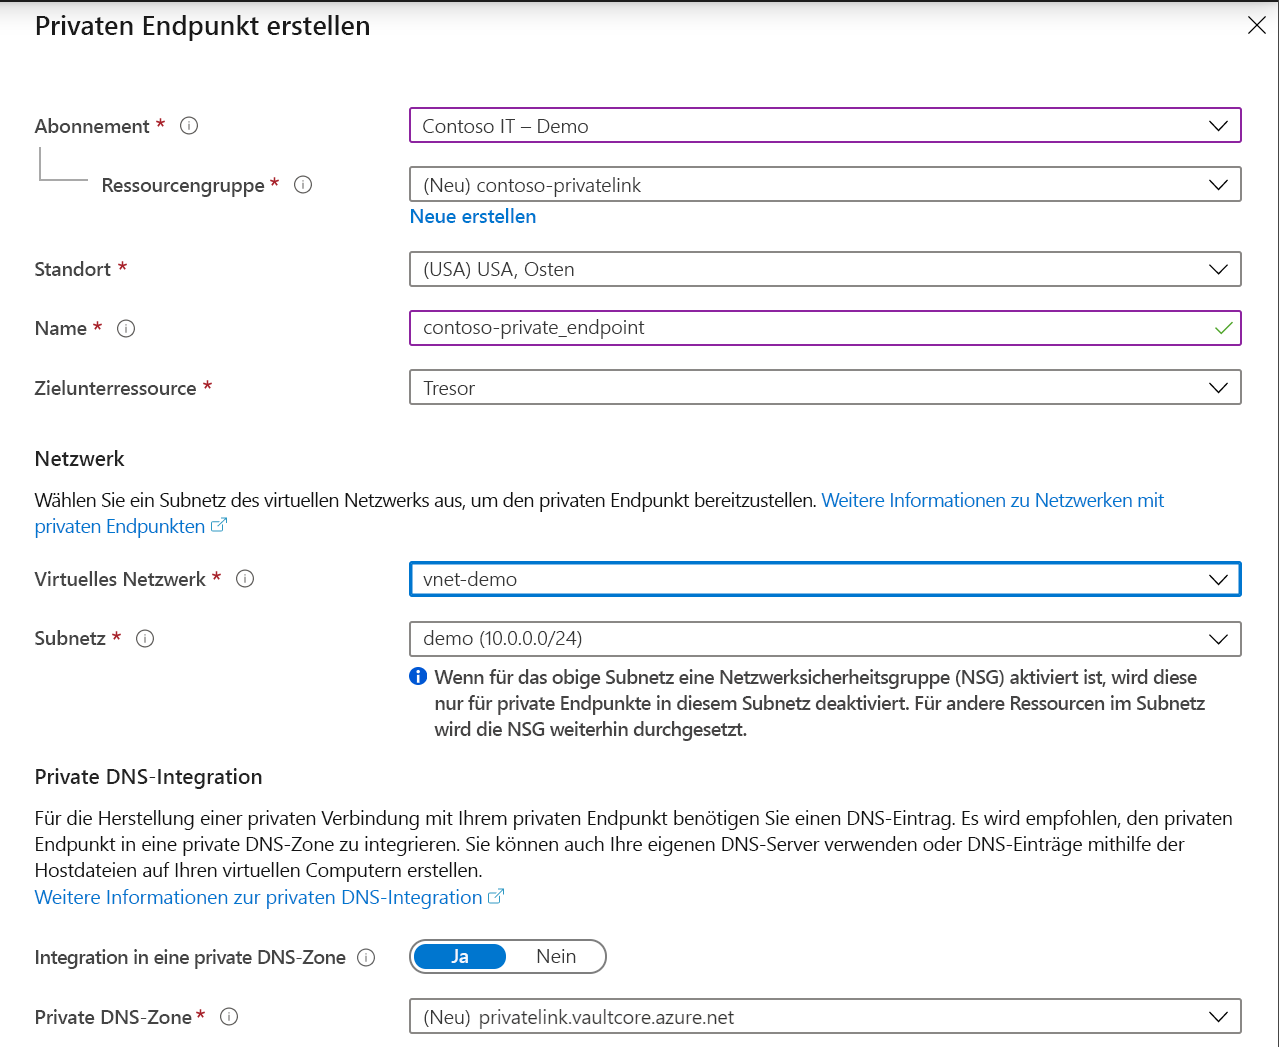 Screenshot that shows the 'Create private endpoint' page with settings selected.